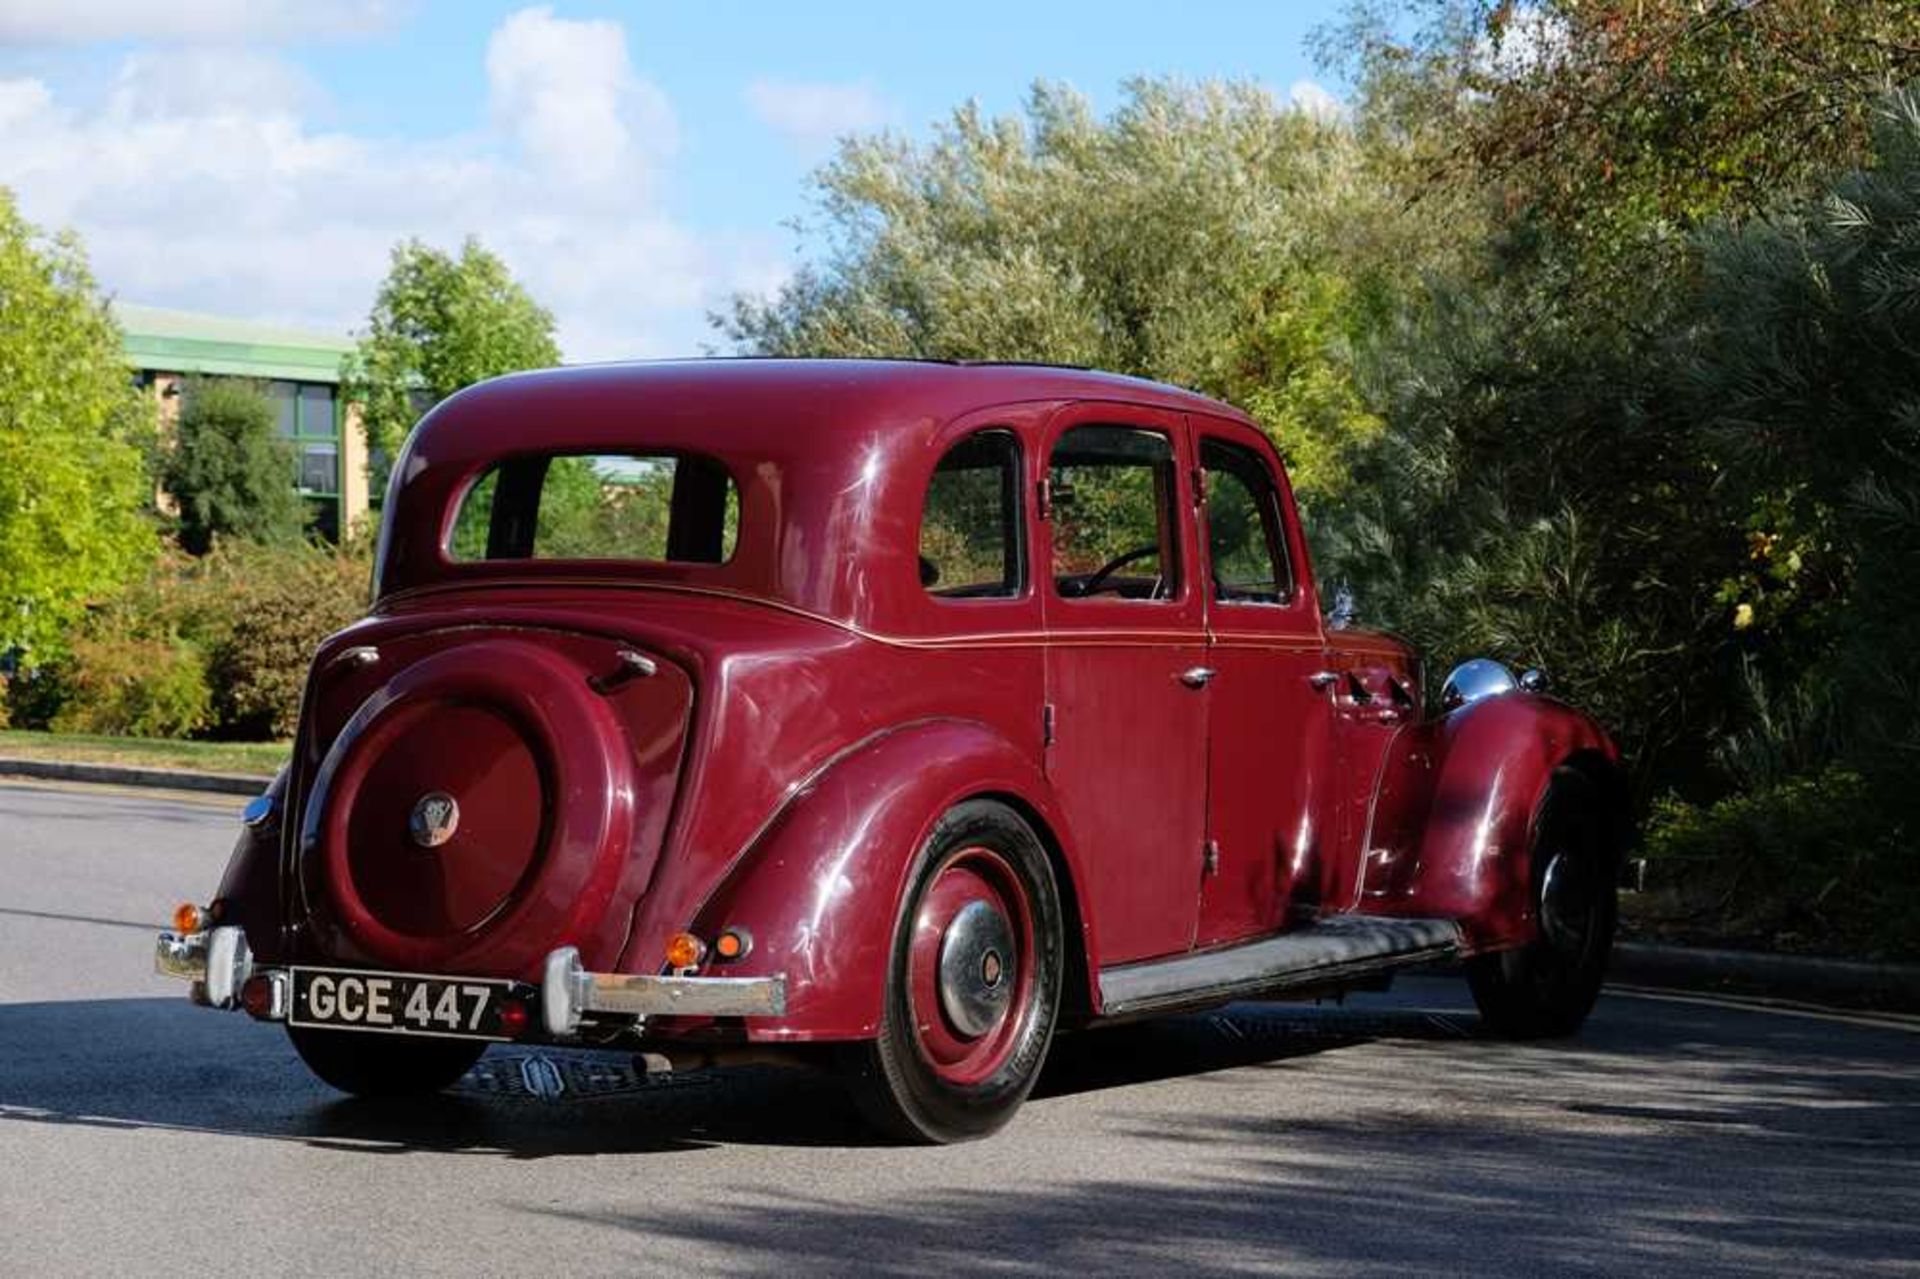 1947 Rover 16 P2 'Six-Light' Saloon - Image 10 of 58